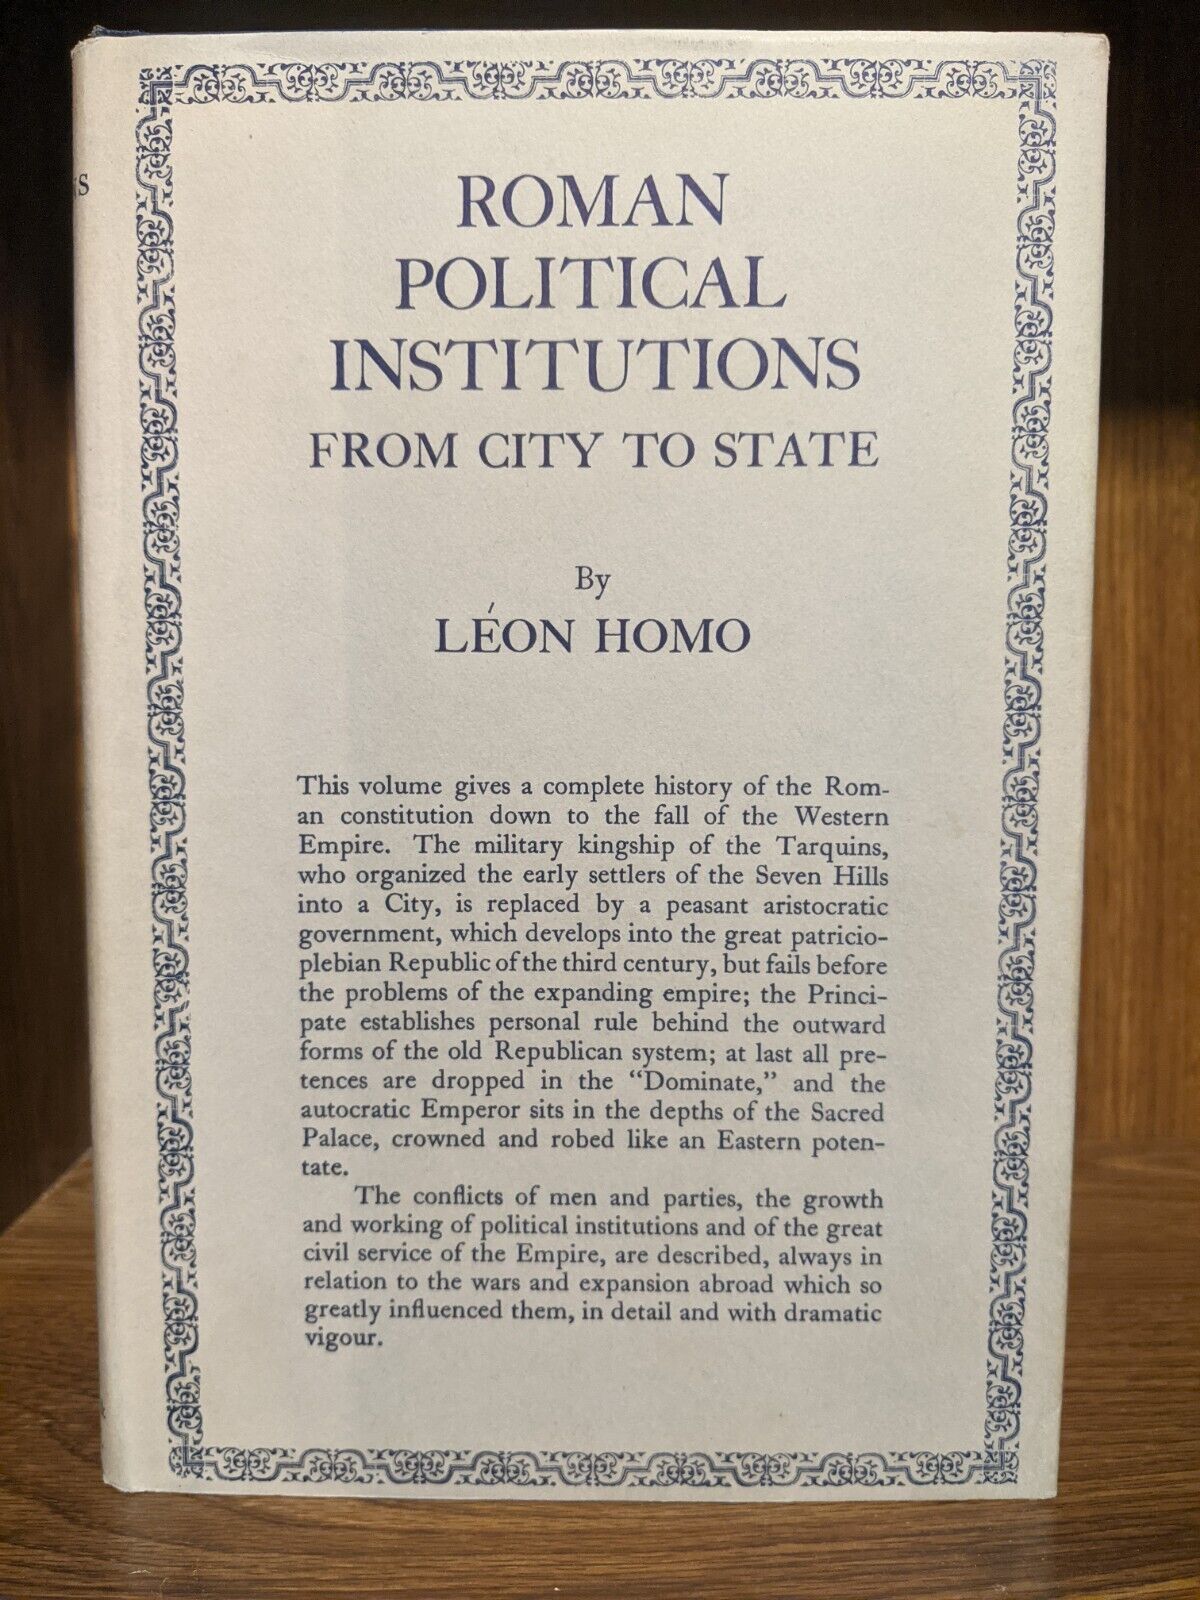 Vintage 1966 Roman Political Institutions from City to State by Léon Homo